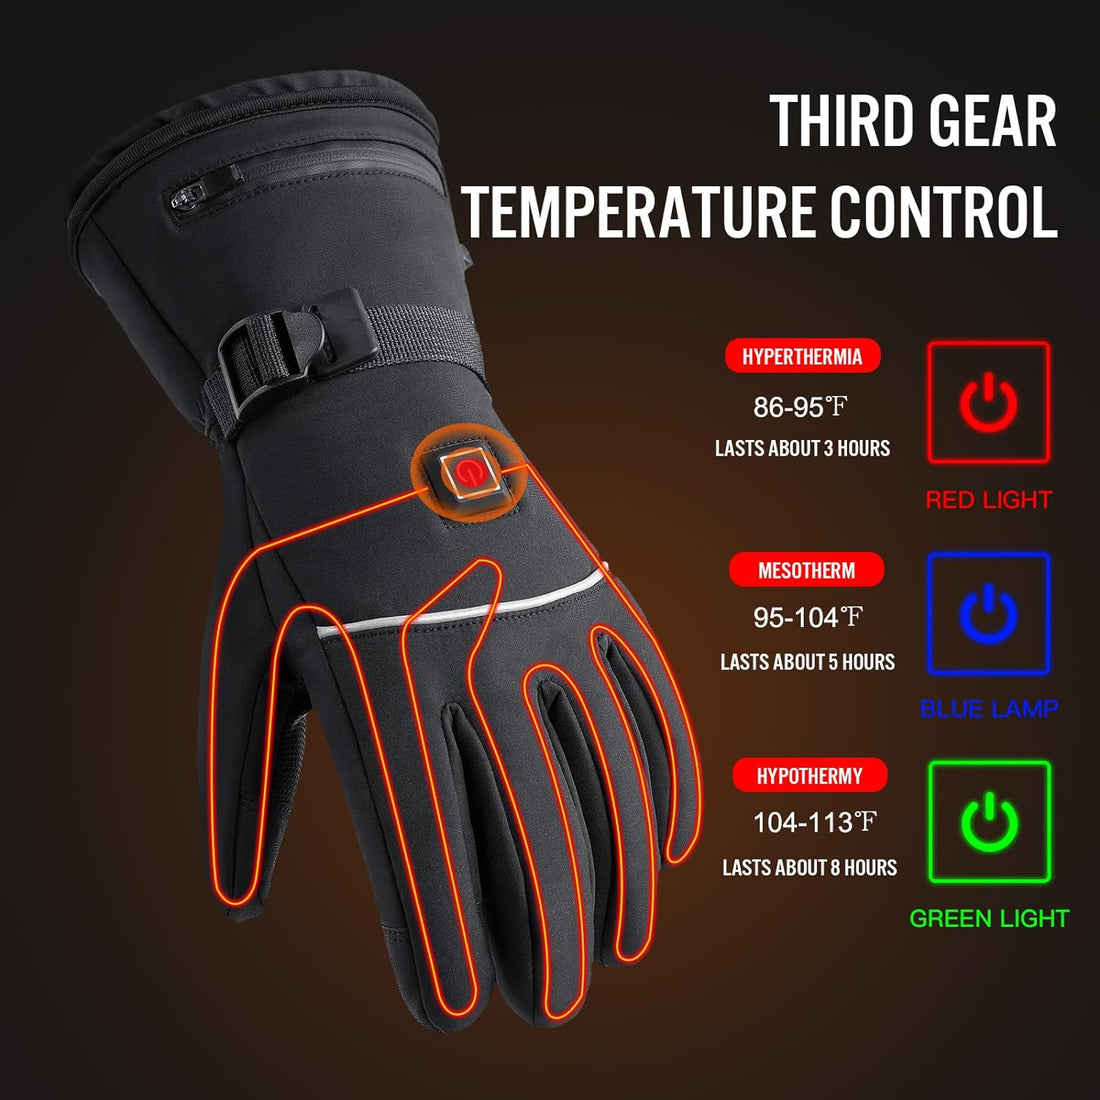 TEMEI Heated Gloves Liners for Men and Women Rechargeable，Light Waterproof Touchscreen Warming Gloves, 3.7v 4000 mAh Battery Electric Heating Hand Warmers Gloves for Cycling Motorcycle Skiing Hunting